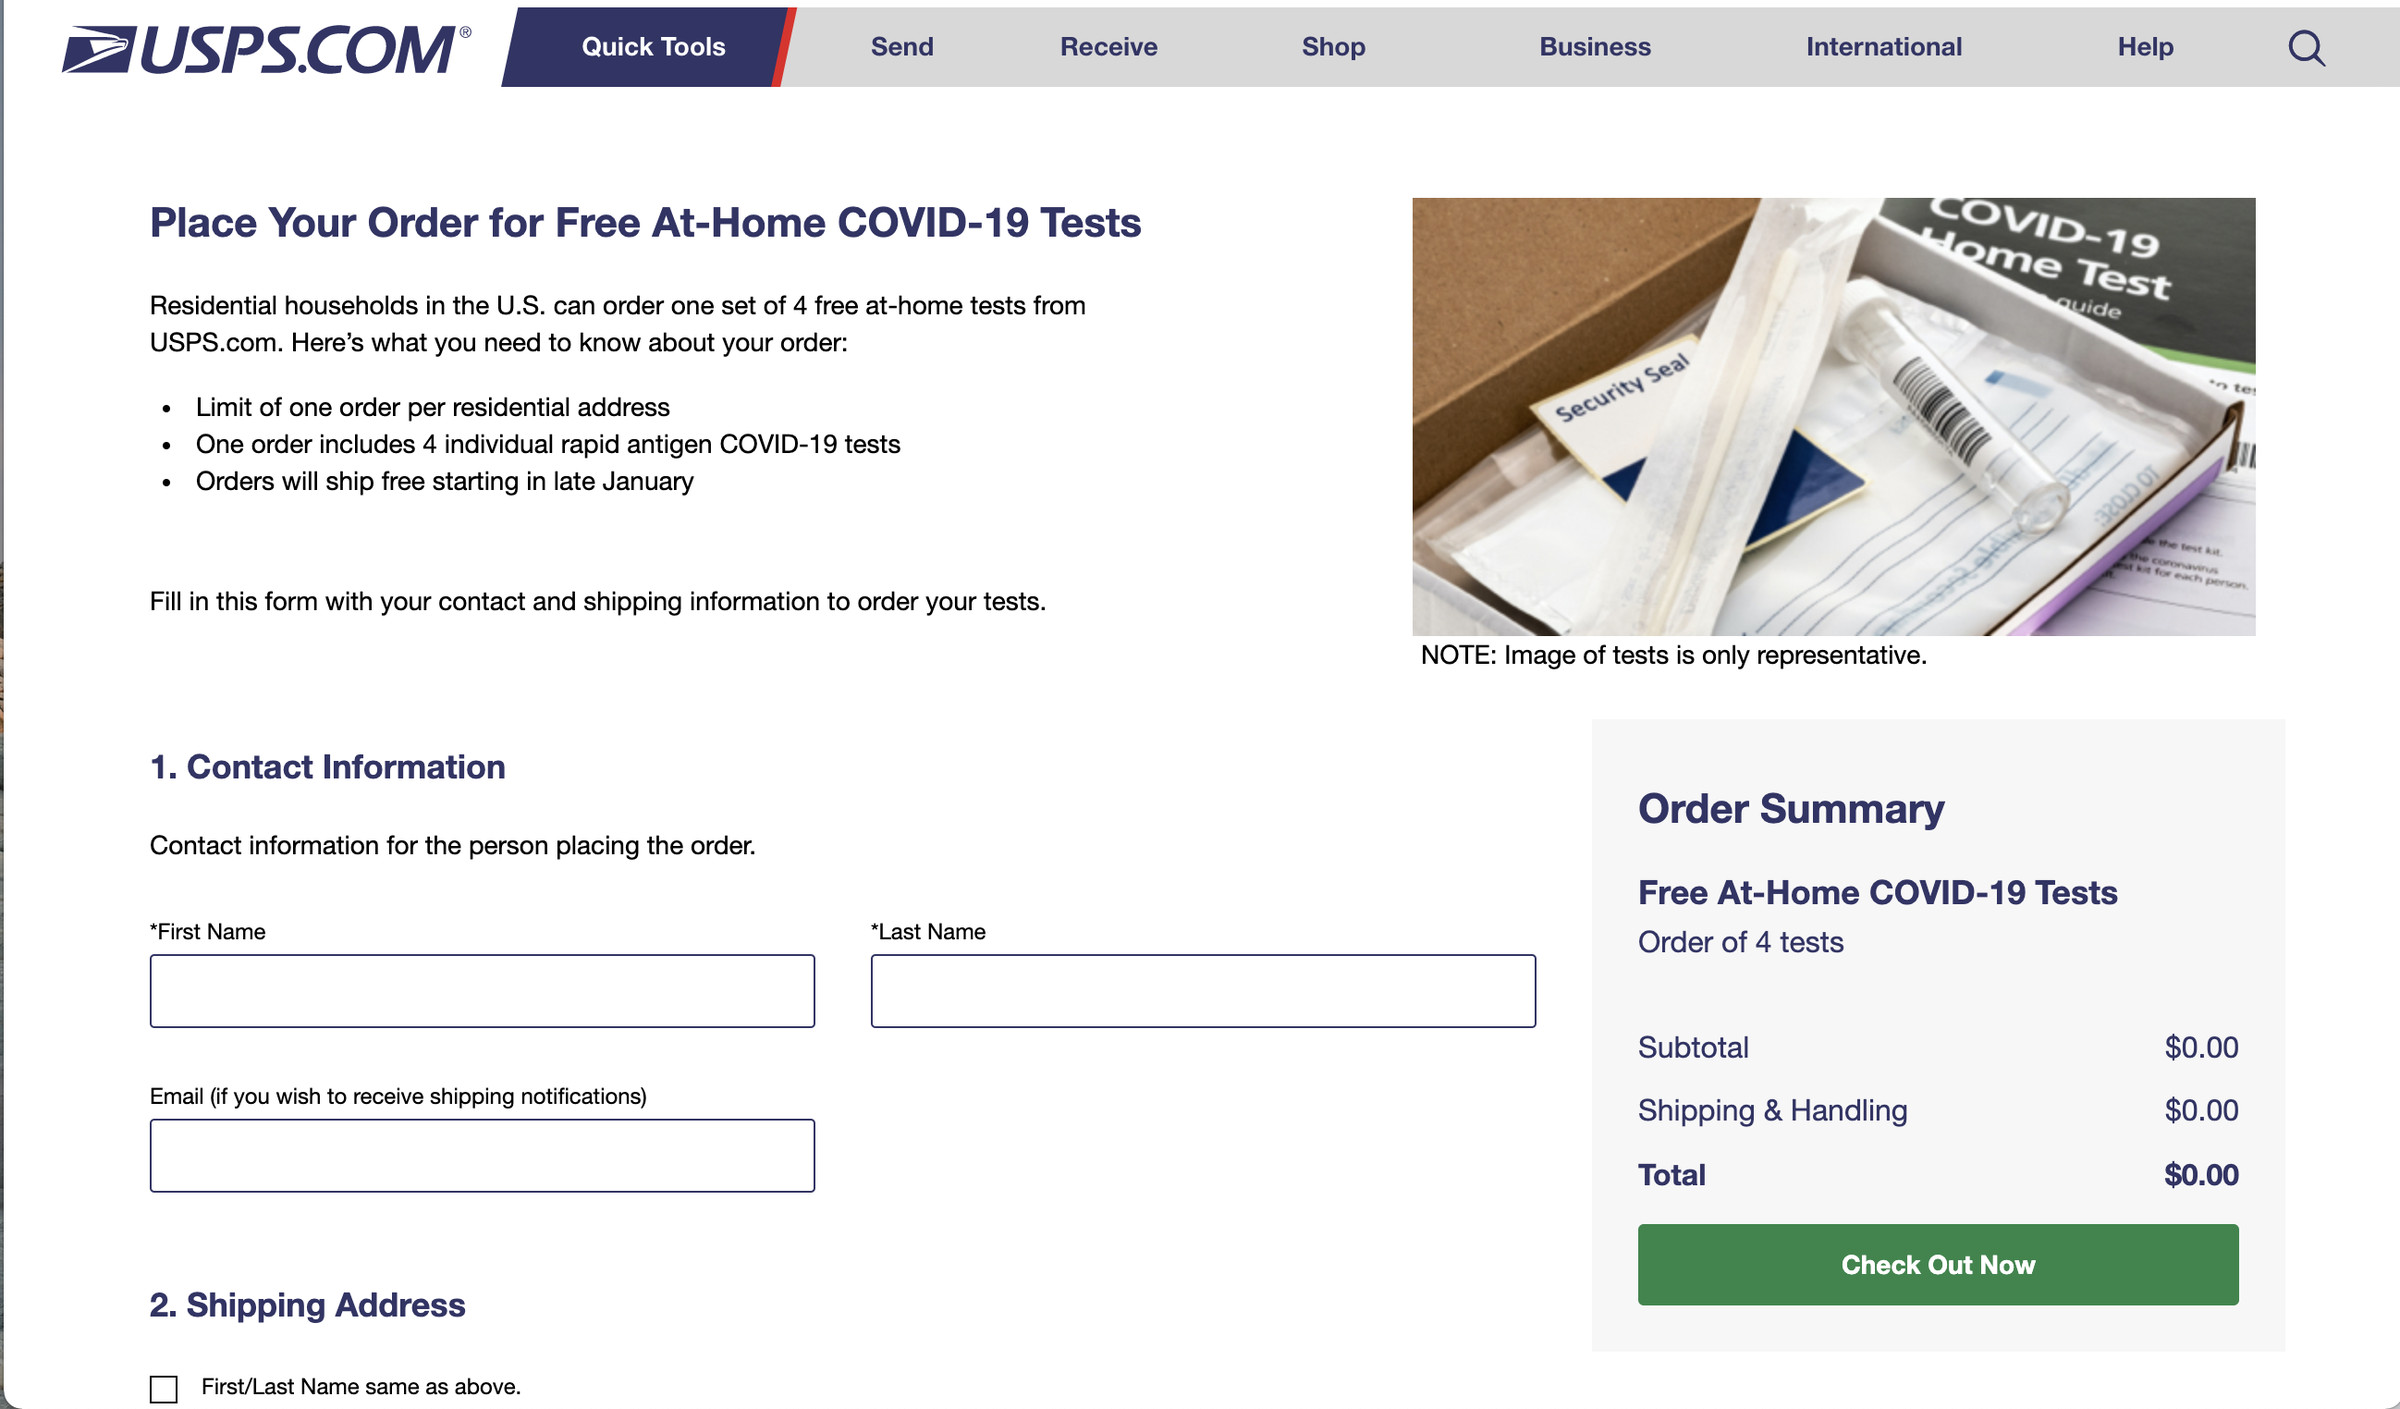 The USPS form for ordering free rapid tests is very simple.